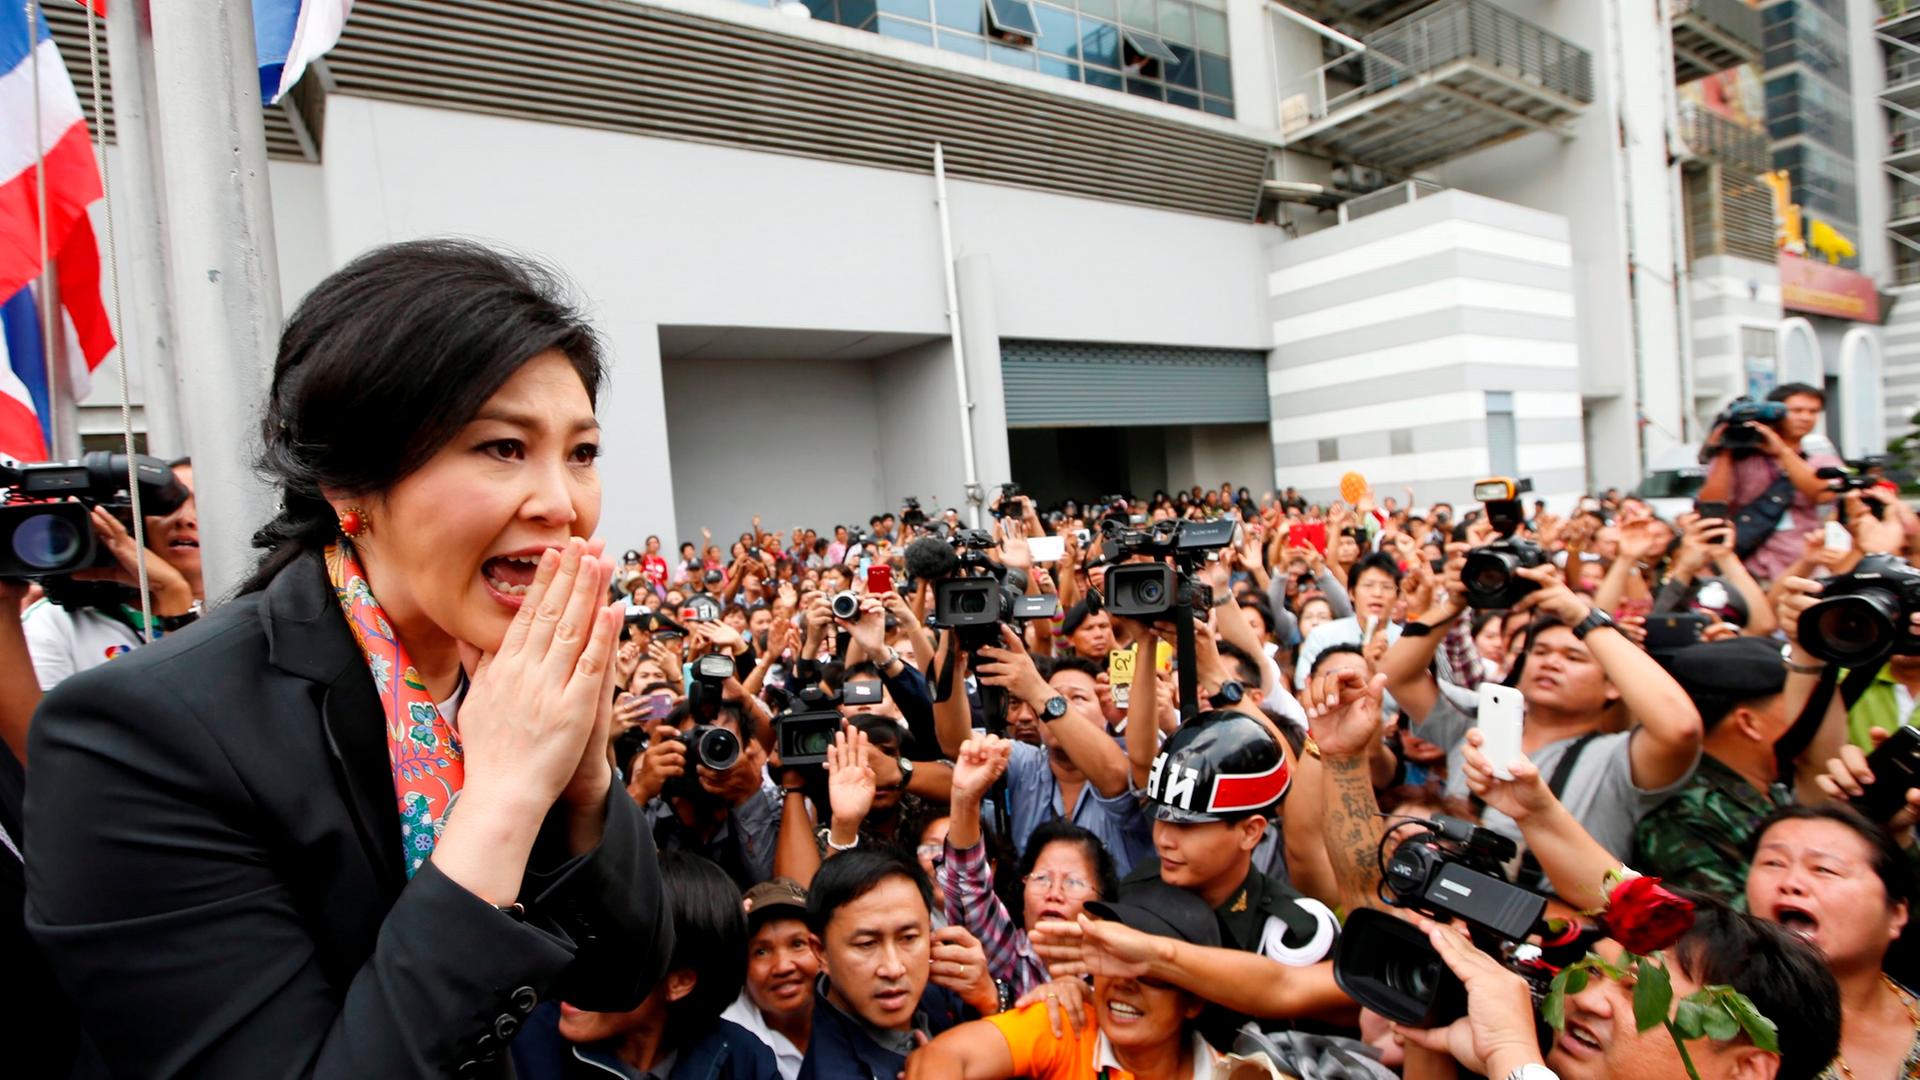 epa04194659 Thai caretaker Prime Minister Yingluck Shinawatra (L) greets supporters in traditional Thai way after she was removed from office at the Office of the Permanent Secretary for Defense in Bangkok, Thailand, 07 May 2014. Thai caretaker Prime Mini